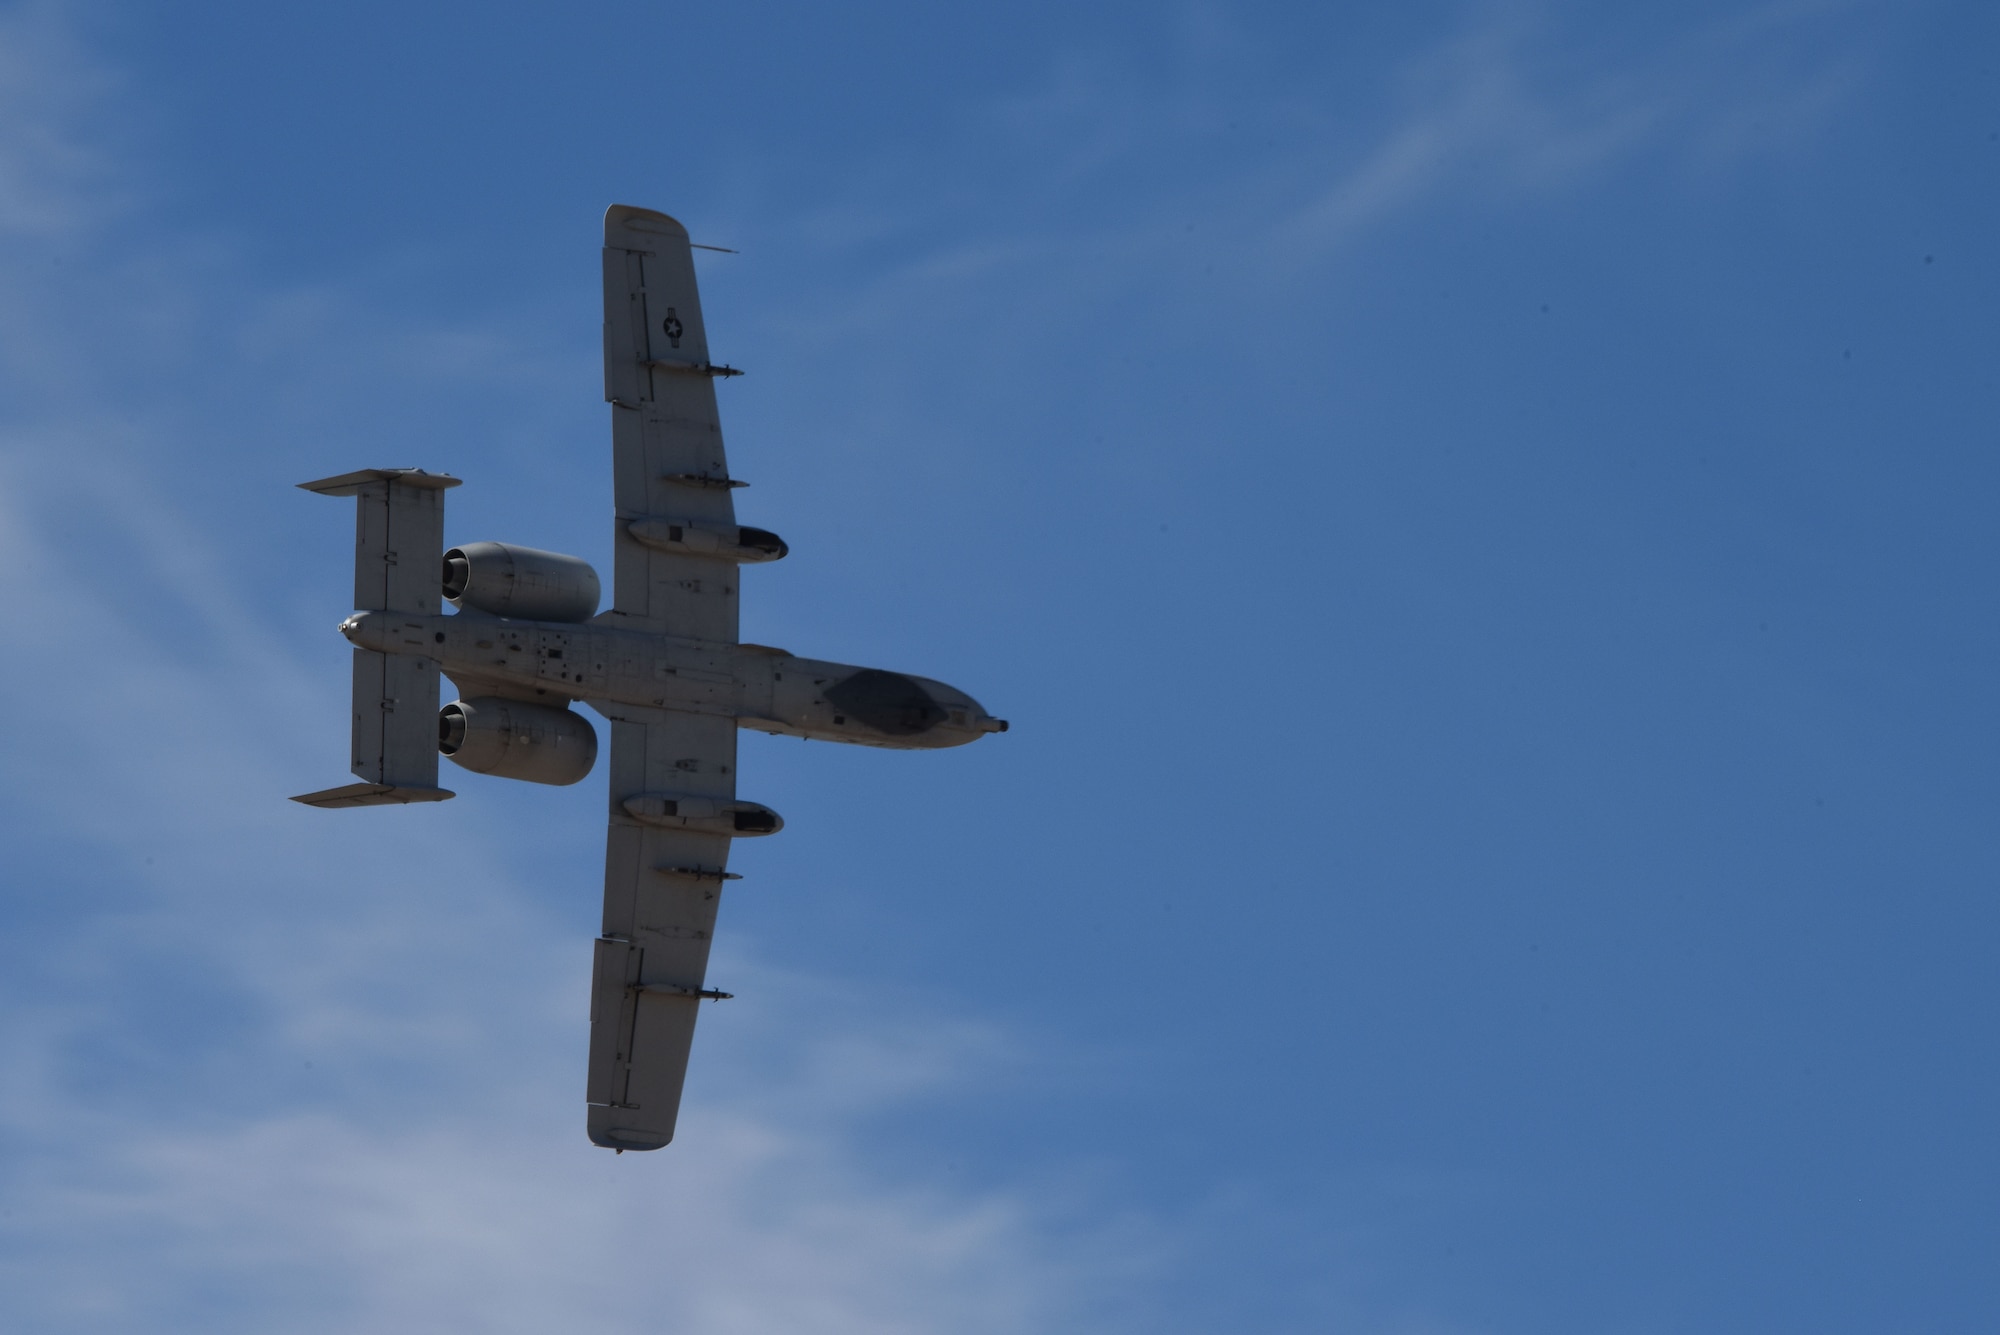 A photo of a plane flying over DM